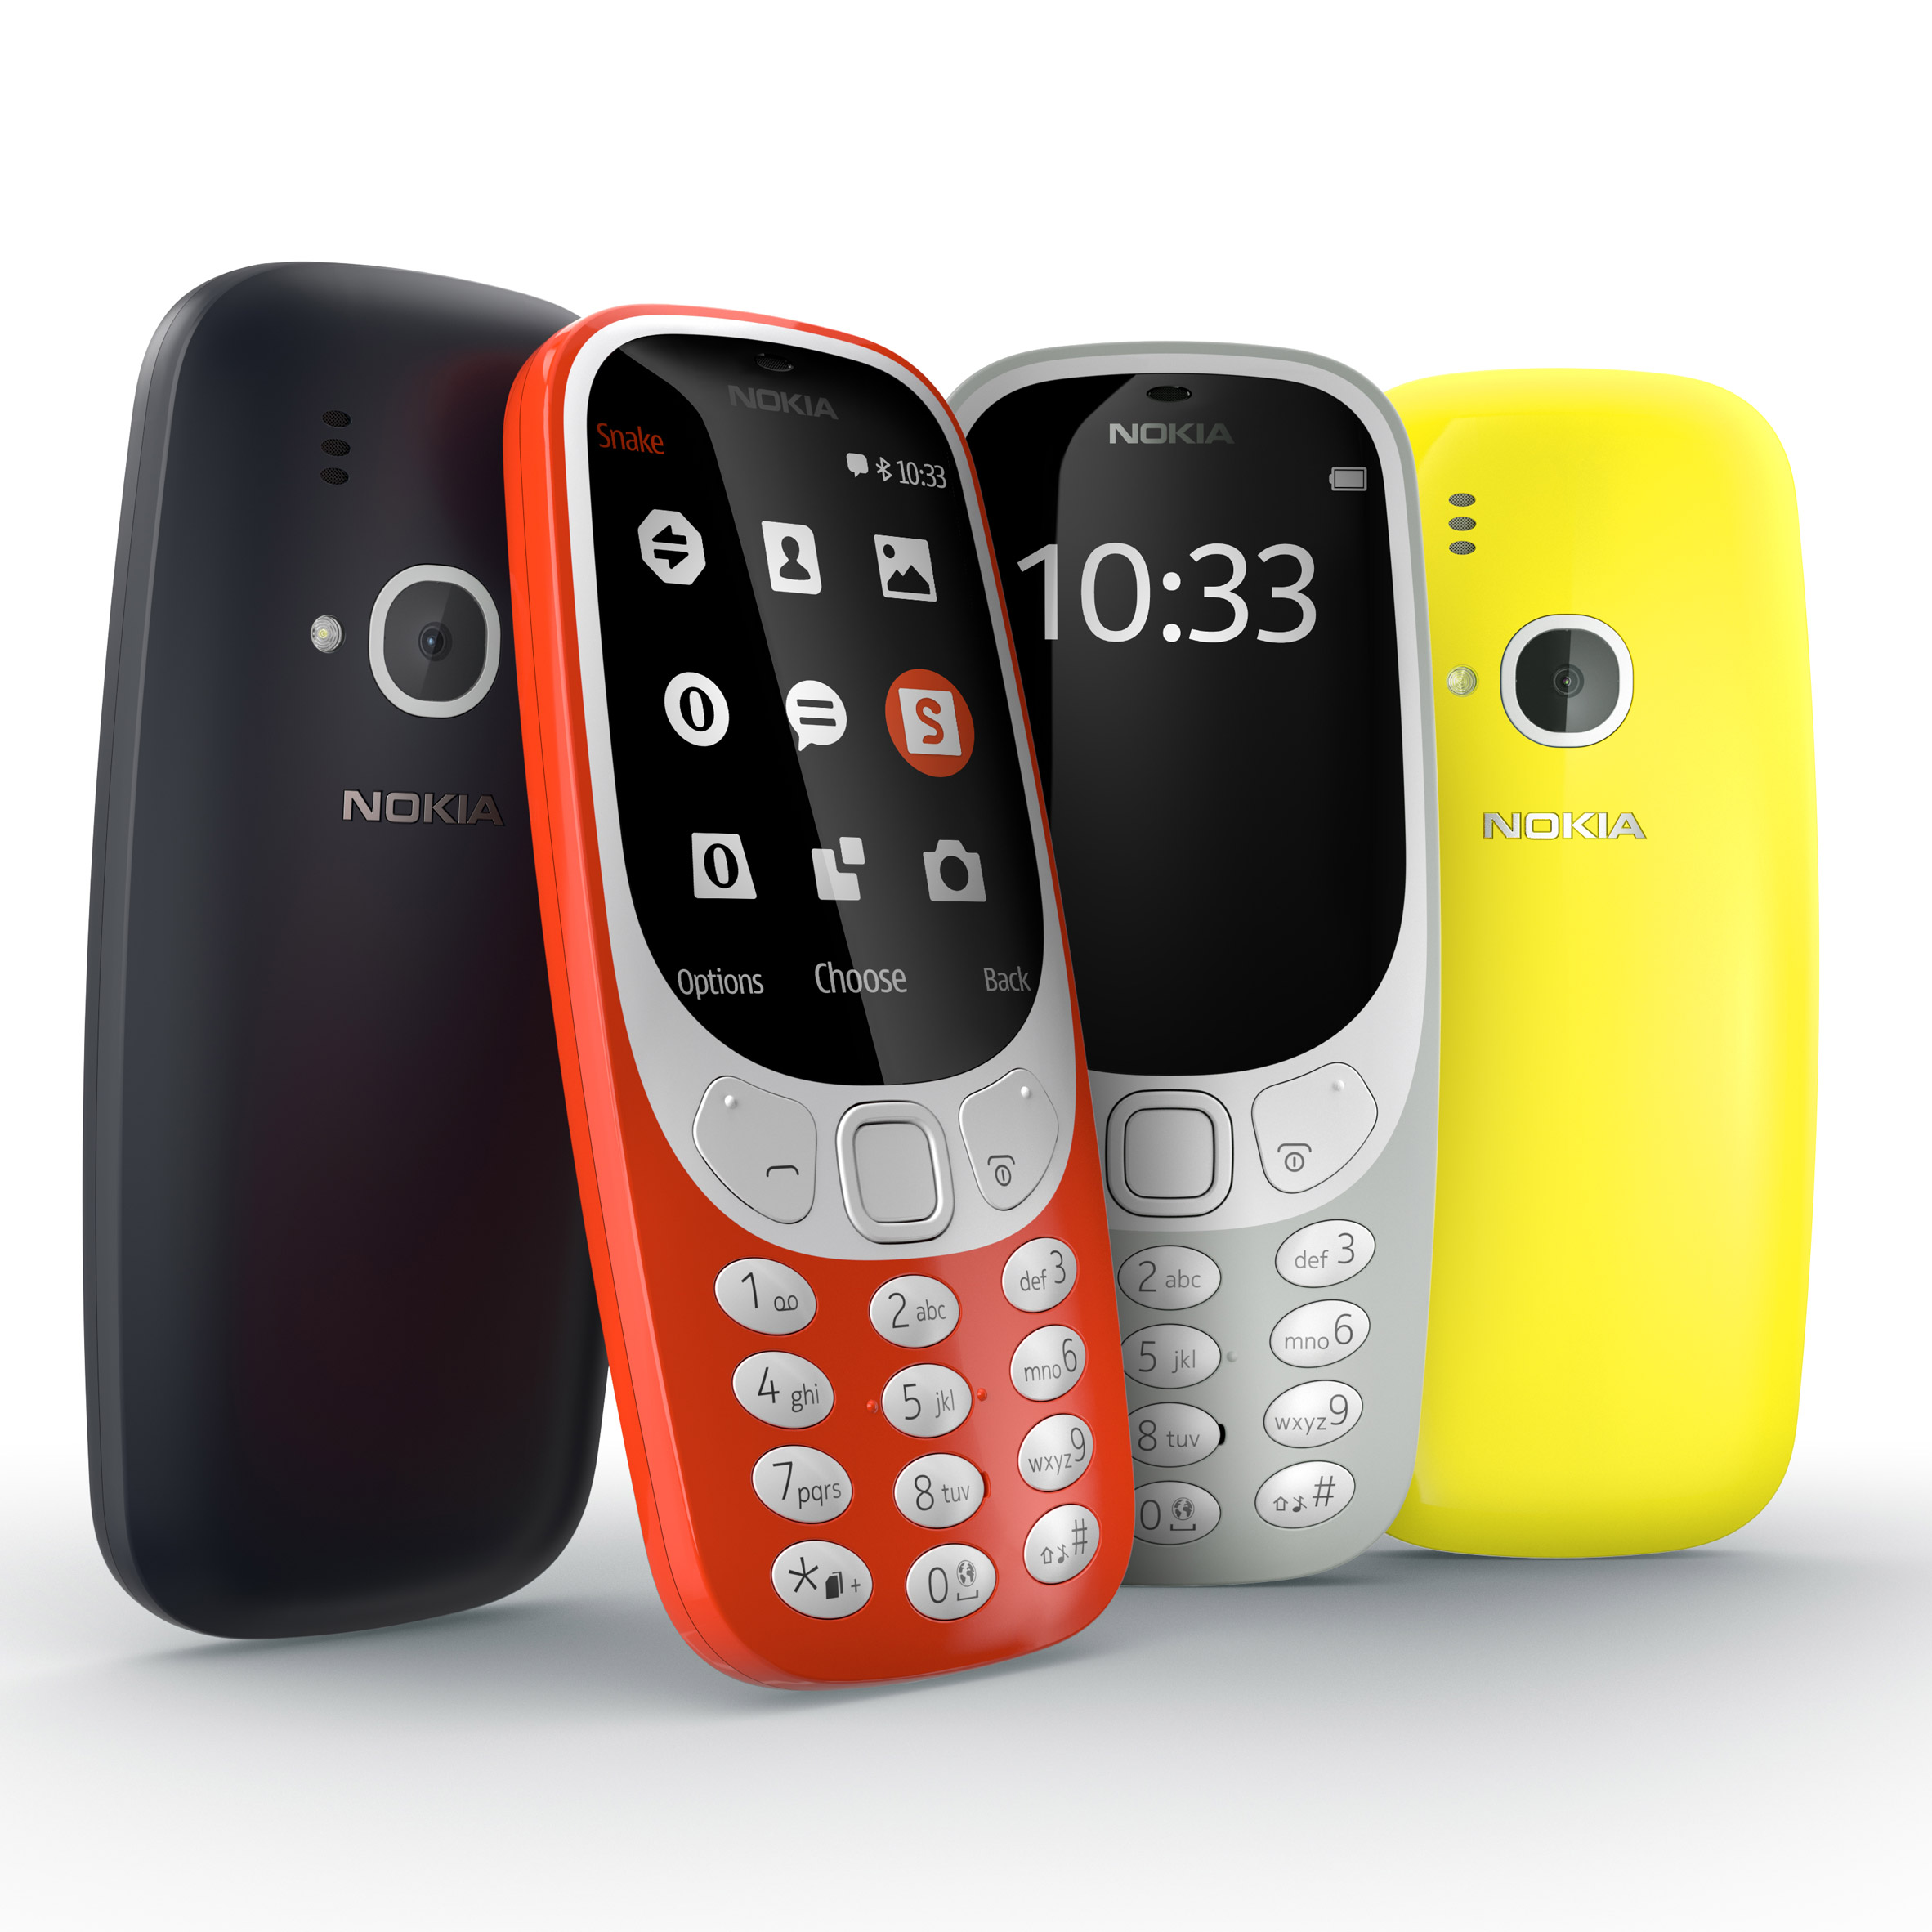 New-look Nokia 3310 mobile phone revealed